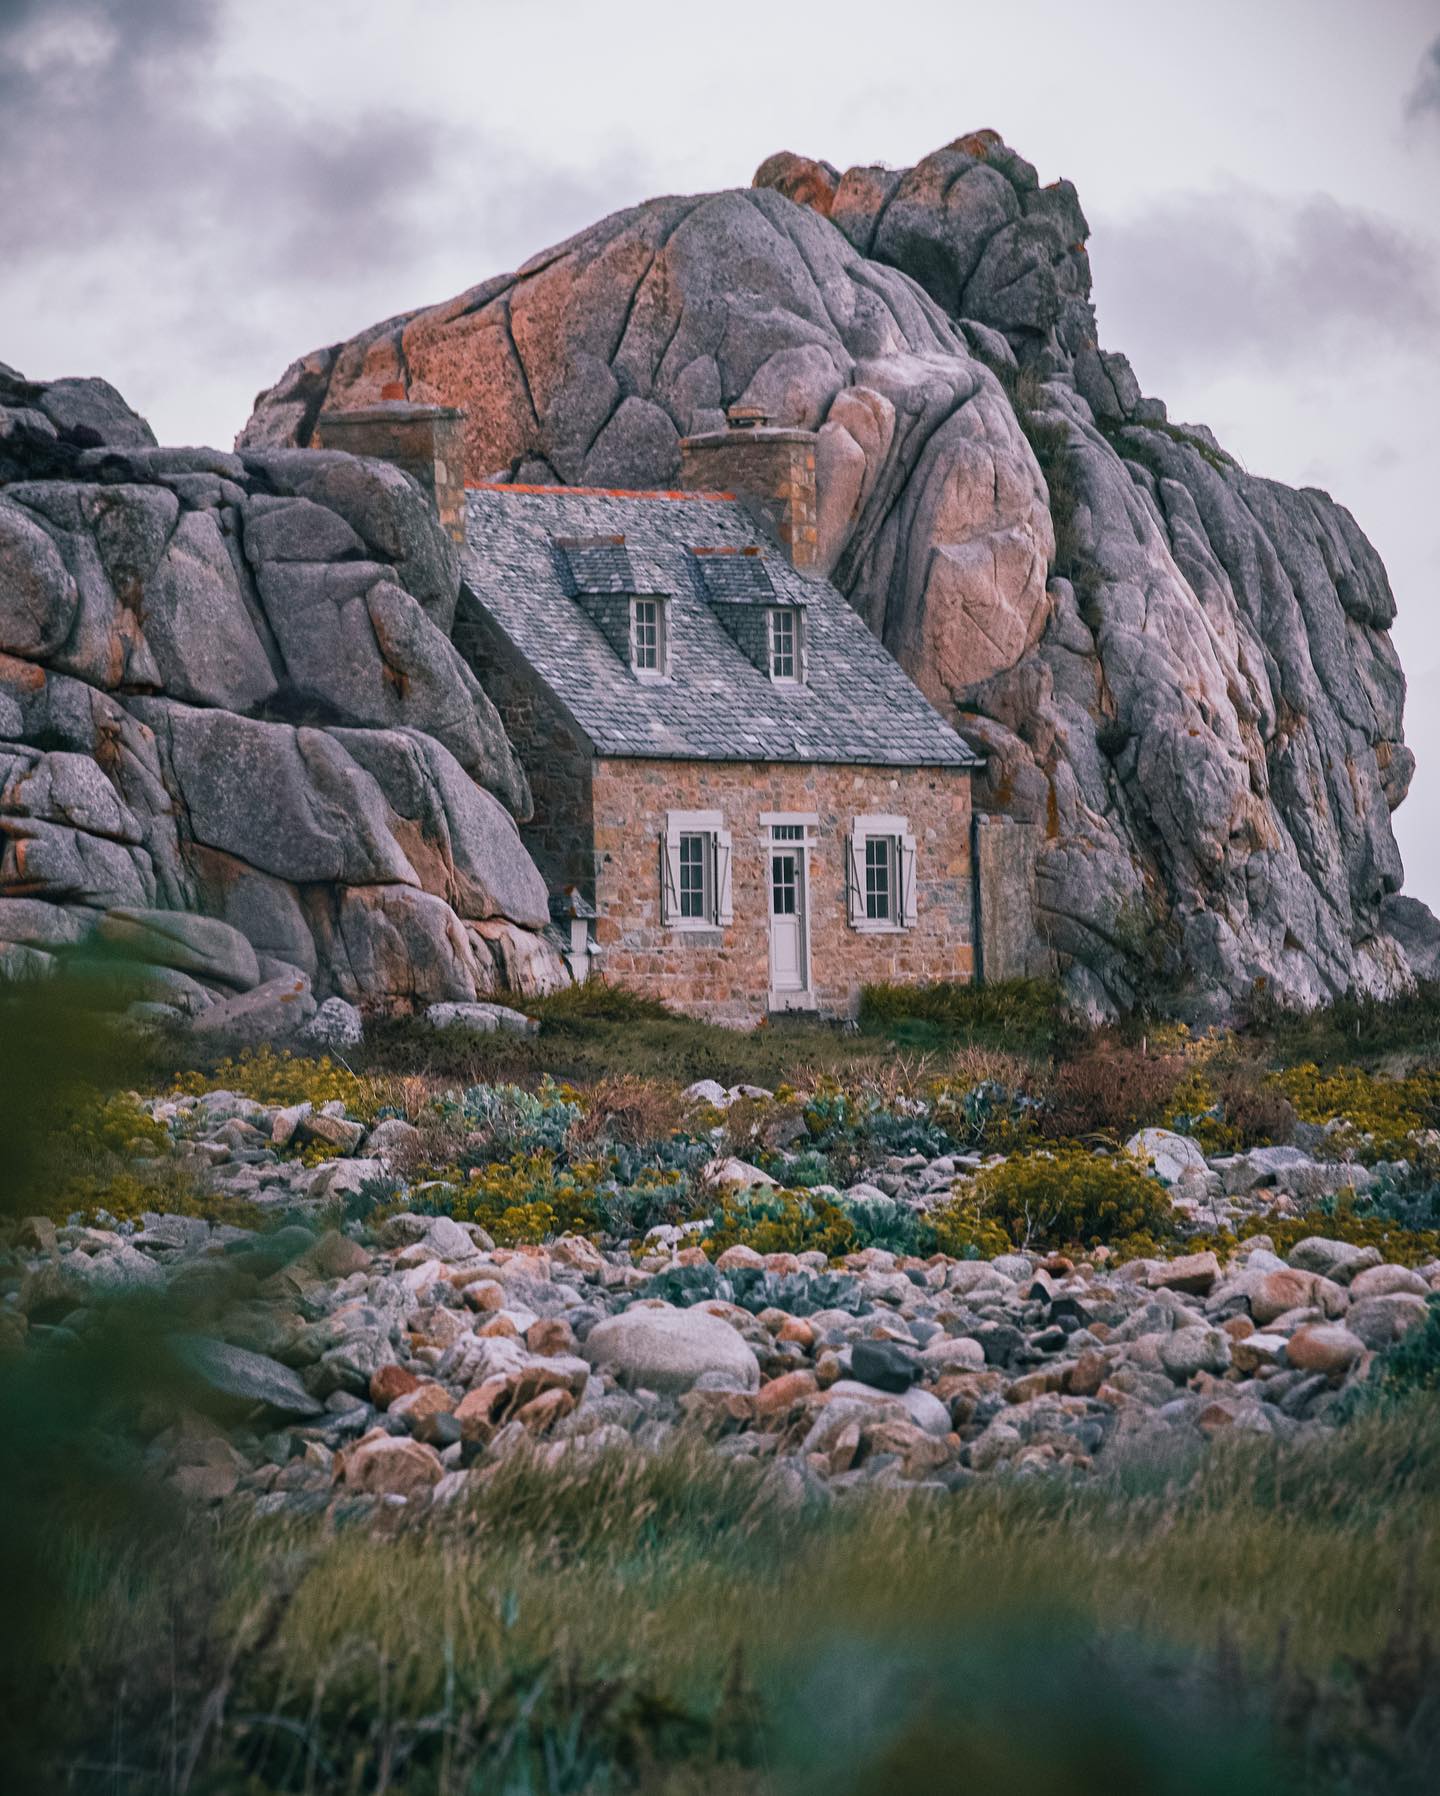 The house between the rocks.